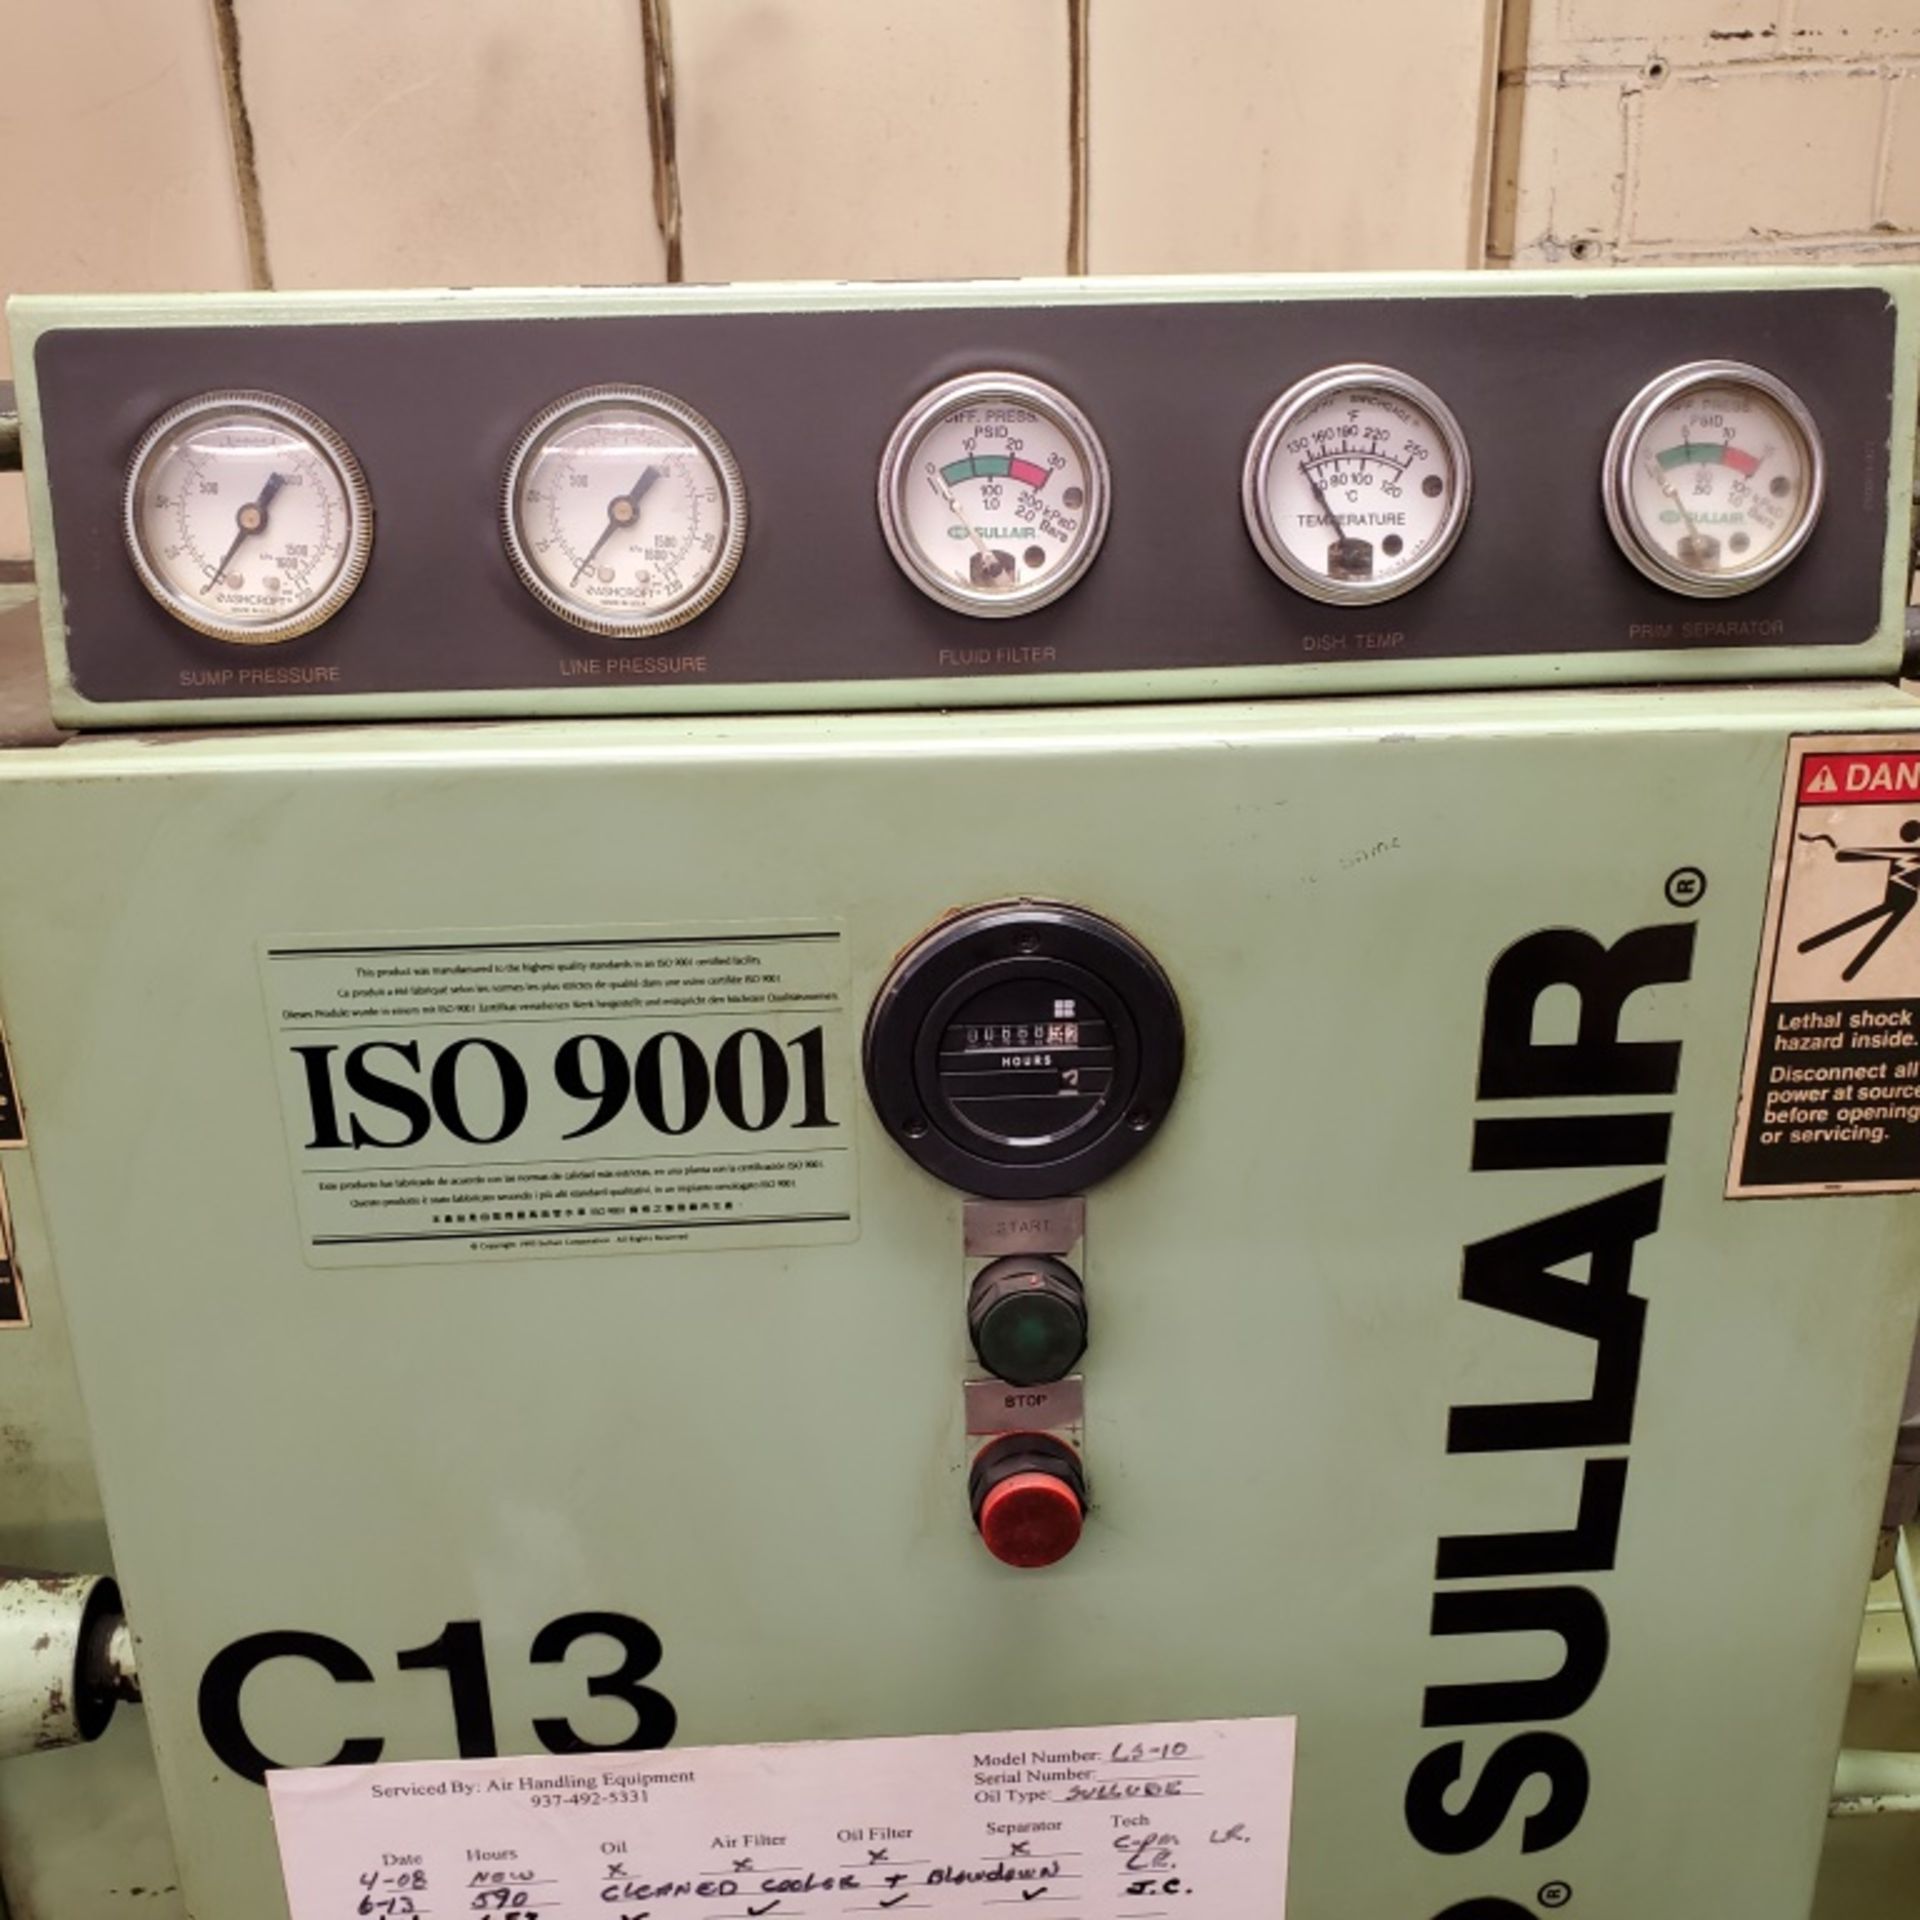 Sullair LS-10 Rotary Screw Air Compressor 40HP, 150 Gallon Tank, 2322 Hours, 230v, 3 PH, Loading Fee - Image 7 of 9